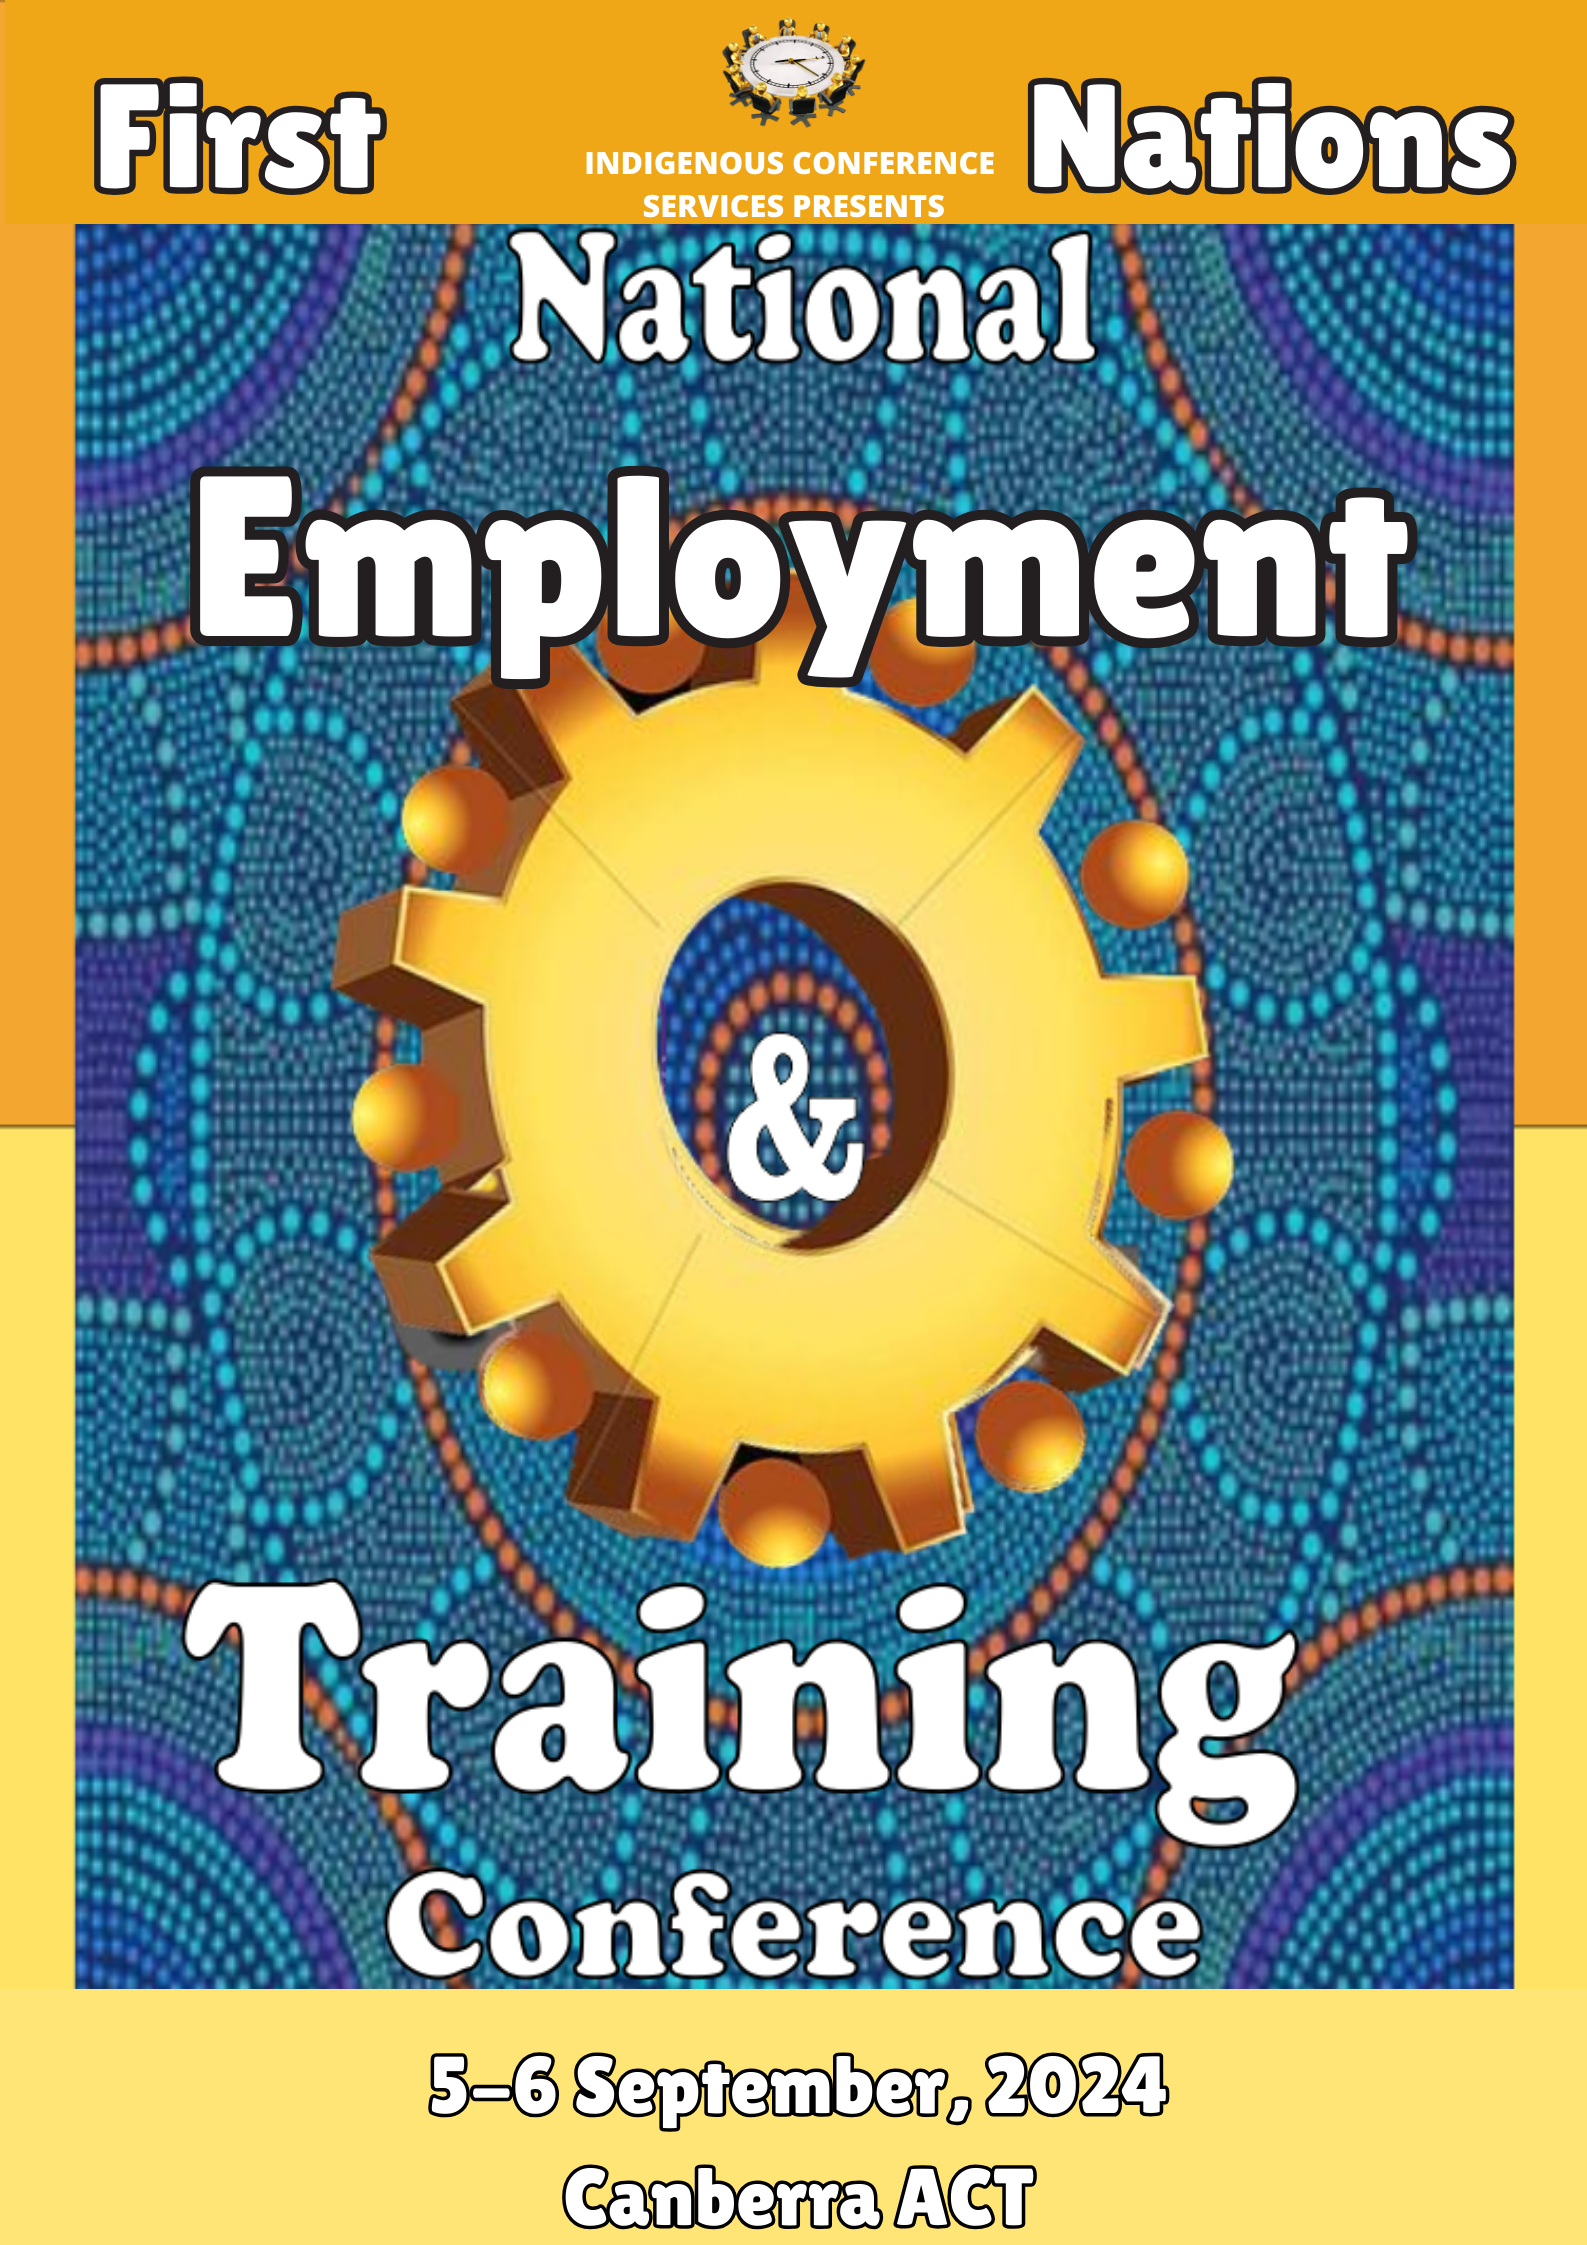 First Nations National Employment and Training Conference